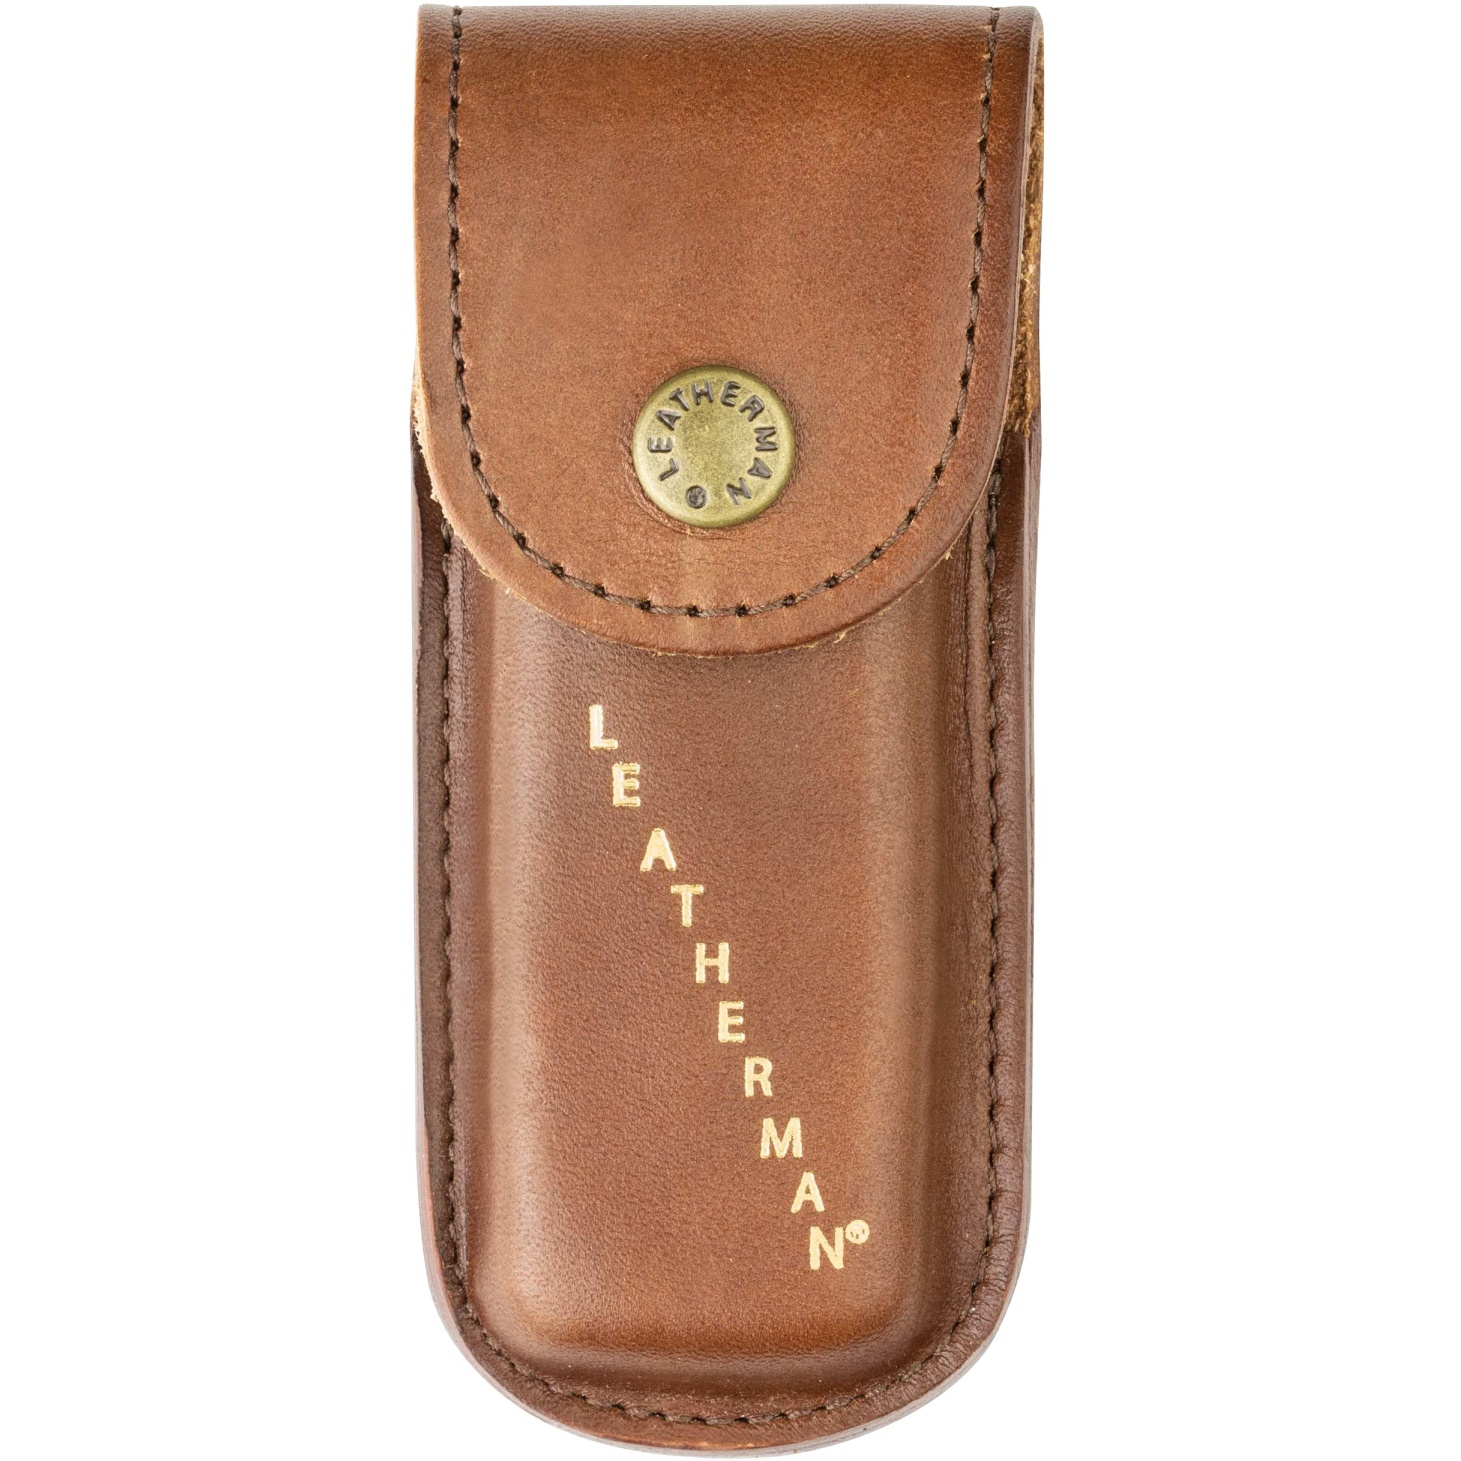 Image of Leatherman Heritage Leather Holster for Multitools - Small - Brown